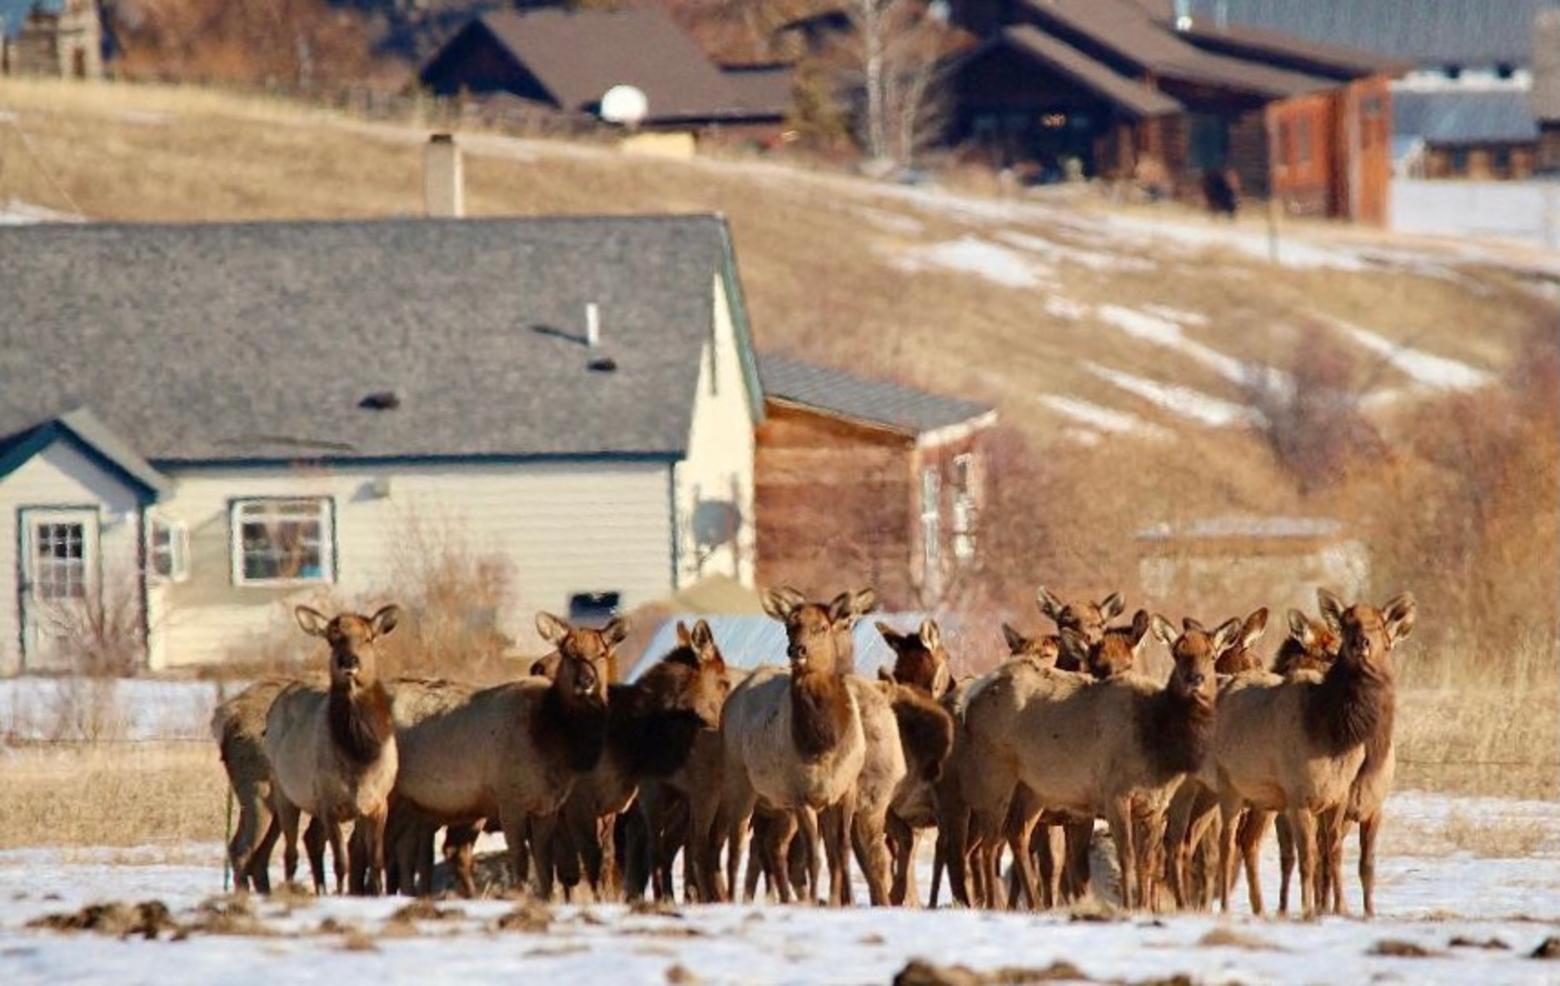 When elk get rattled and feel trapped in the middle of a human subdivision maze, they often lose their bearings and have no direction back to home ground. Photo courtesy Holly Pippel